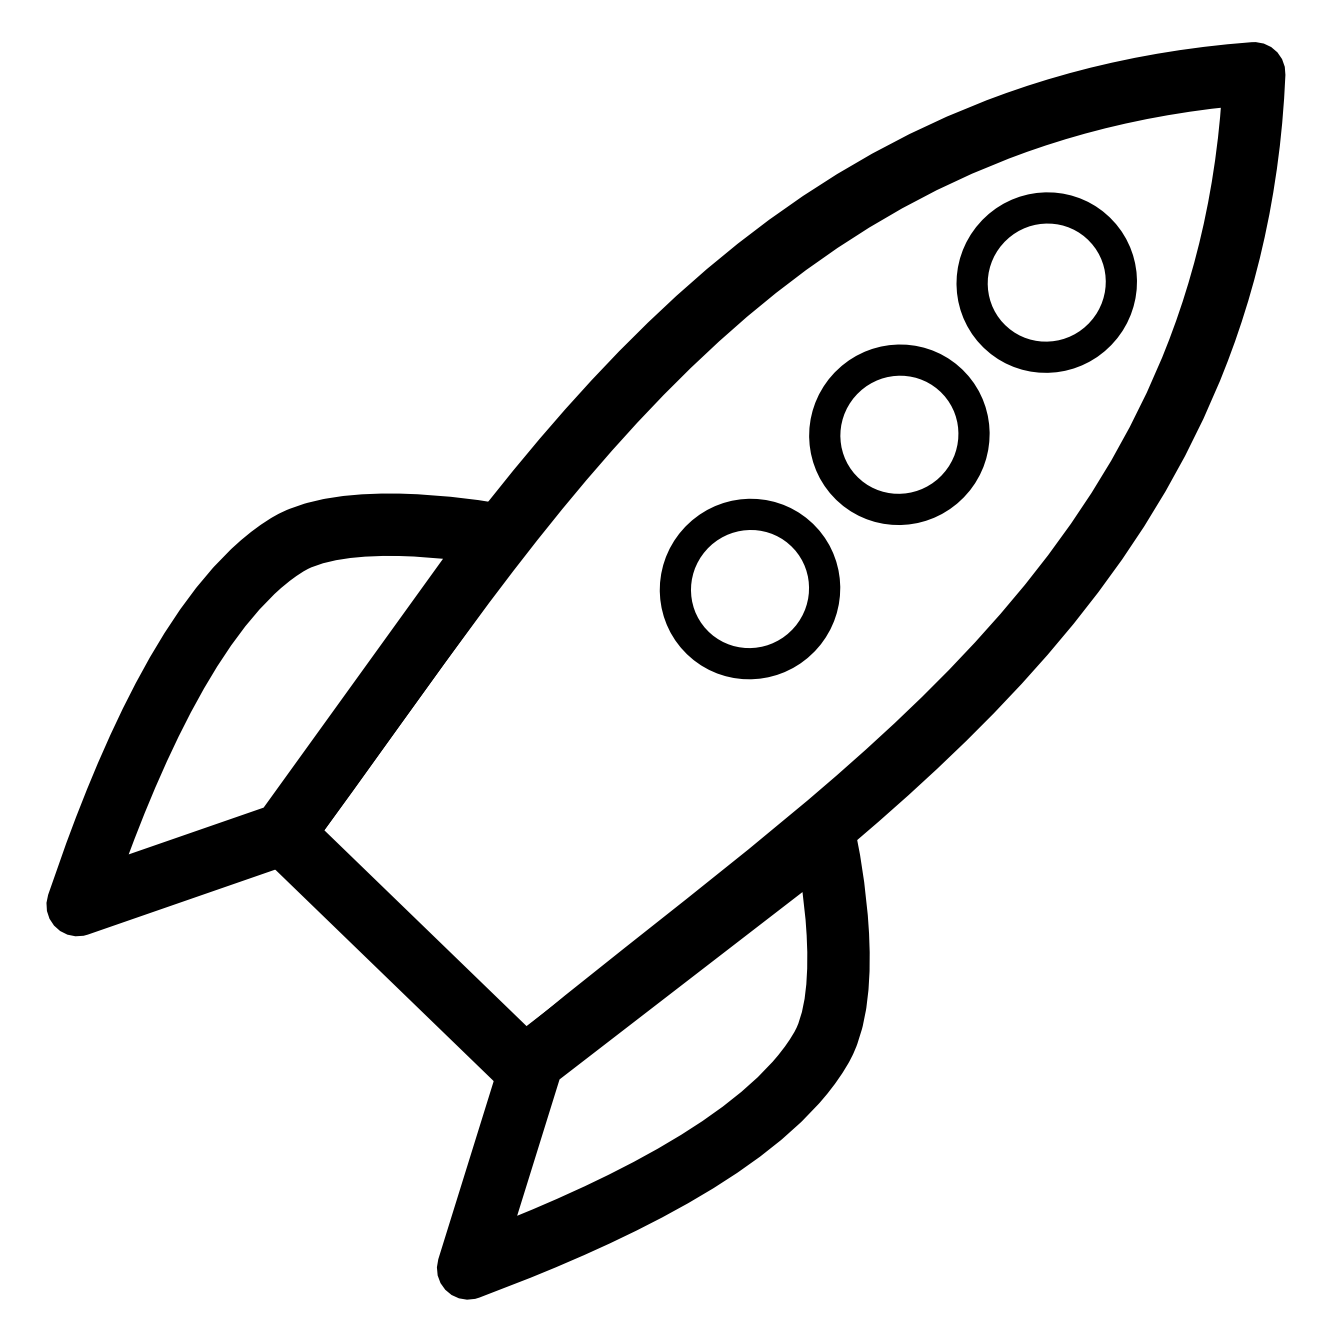 Space rocket clip art image search results clipart image 2